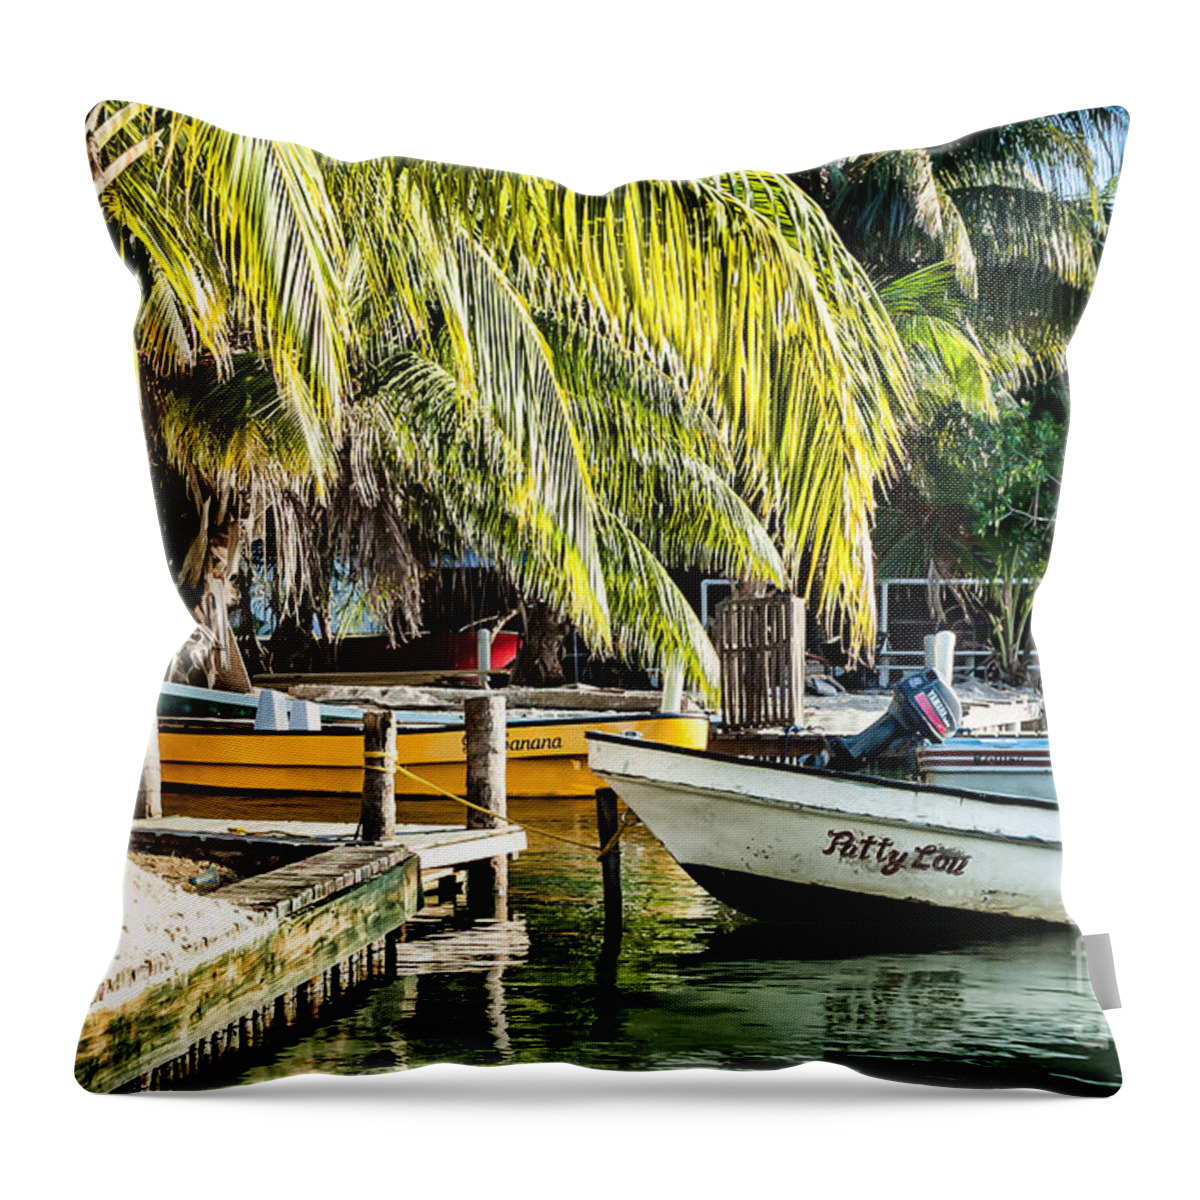 Belize Throw Pillow featuring the photograph Patty Lou by Lawrence Burry